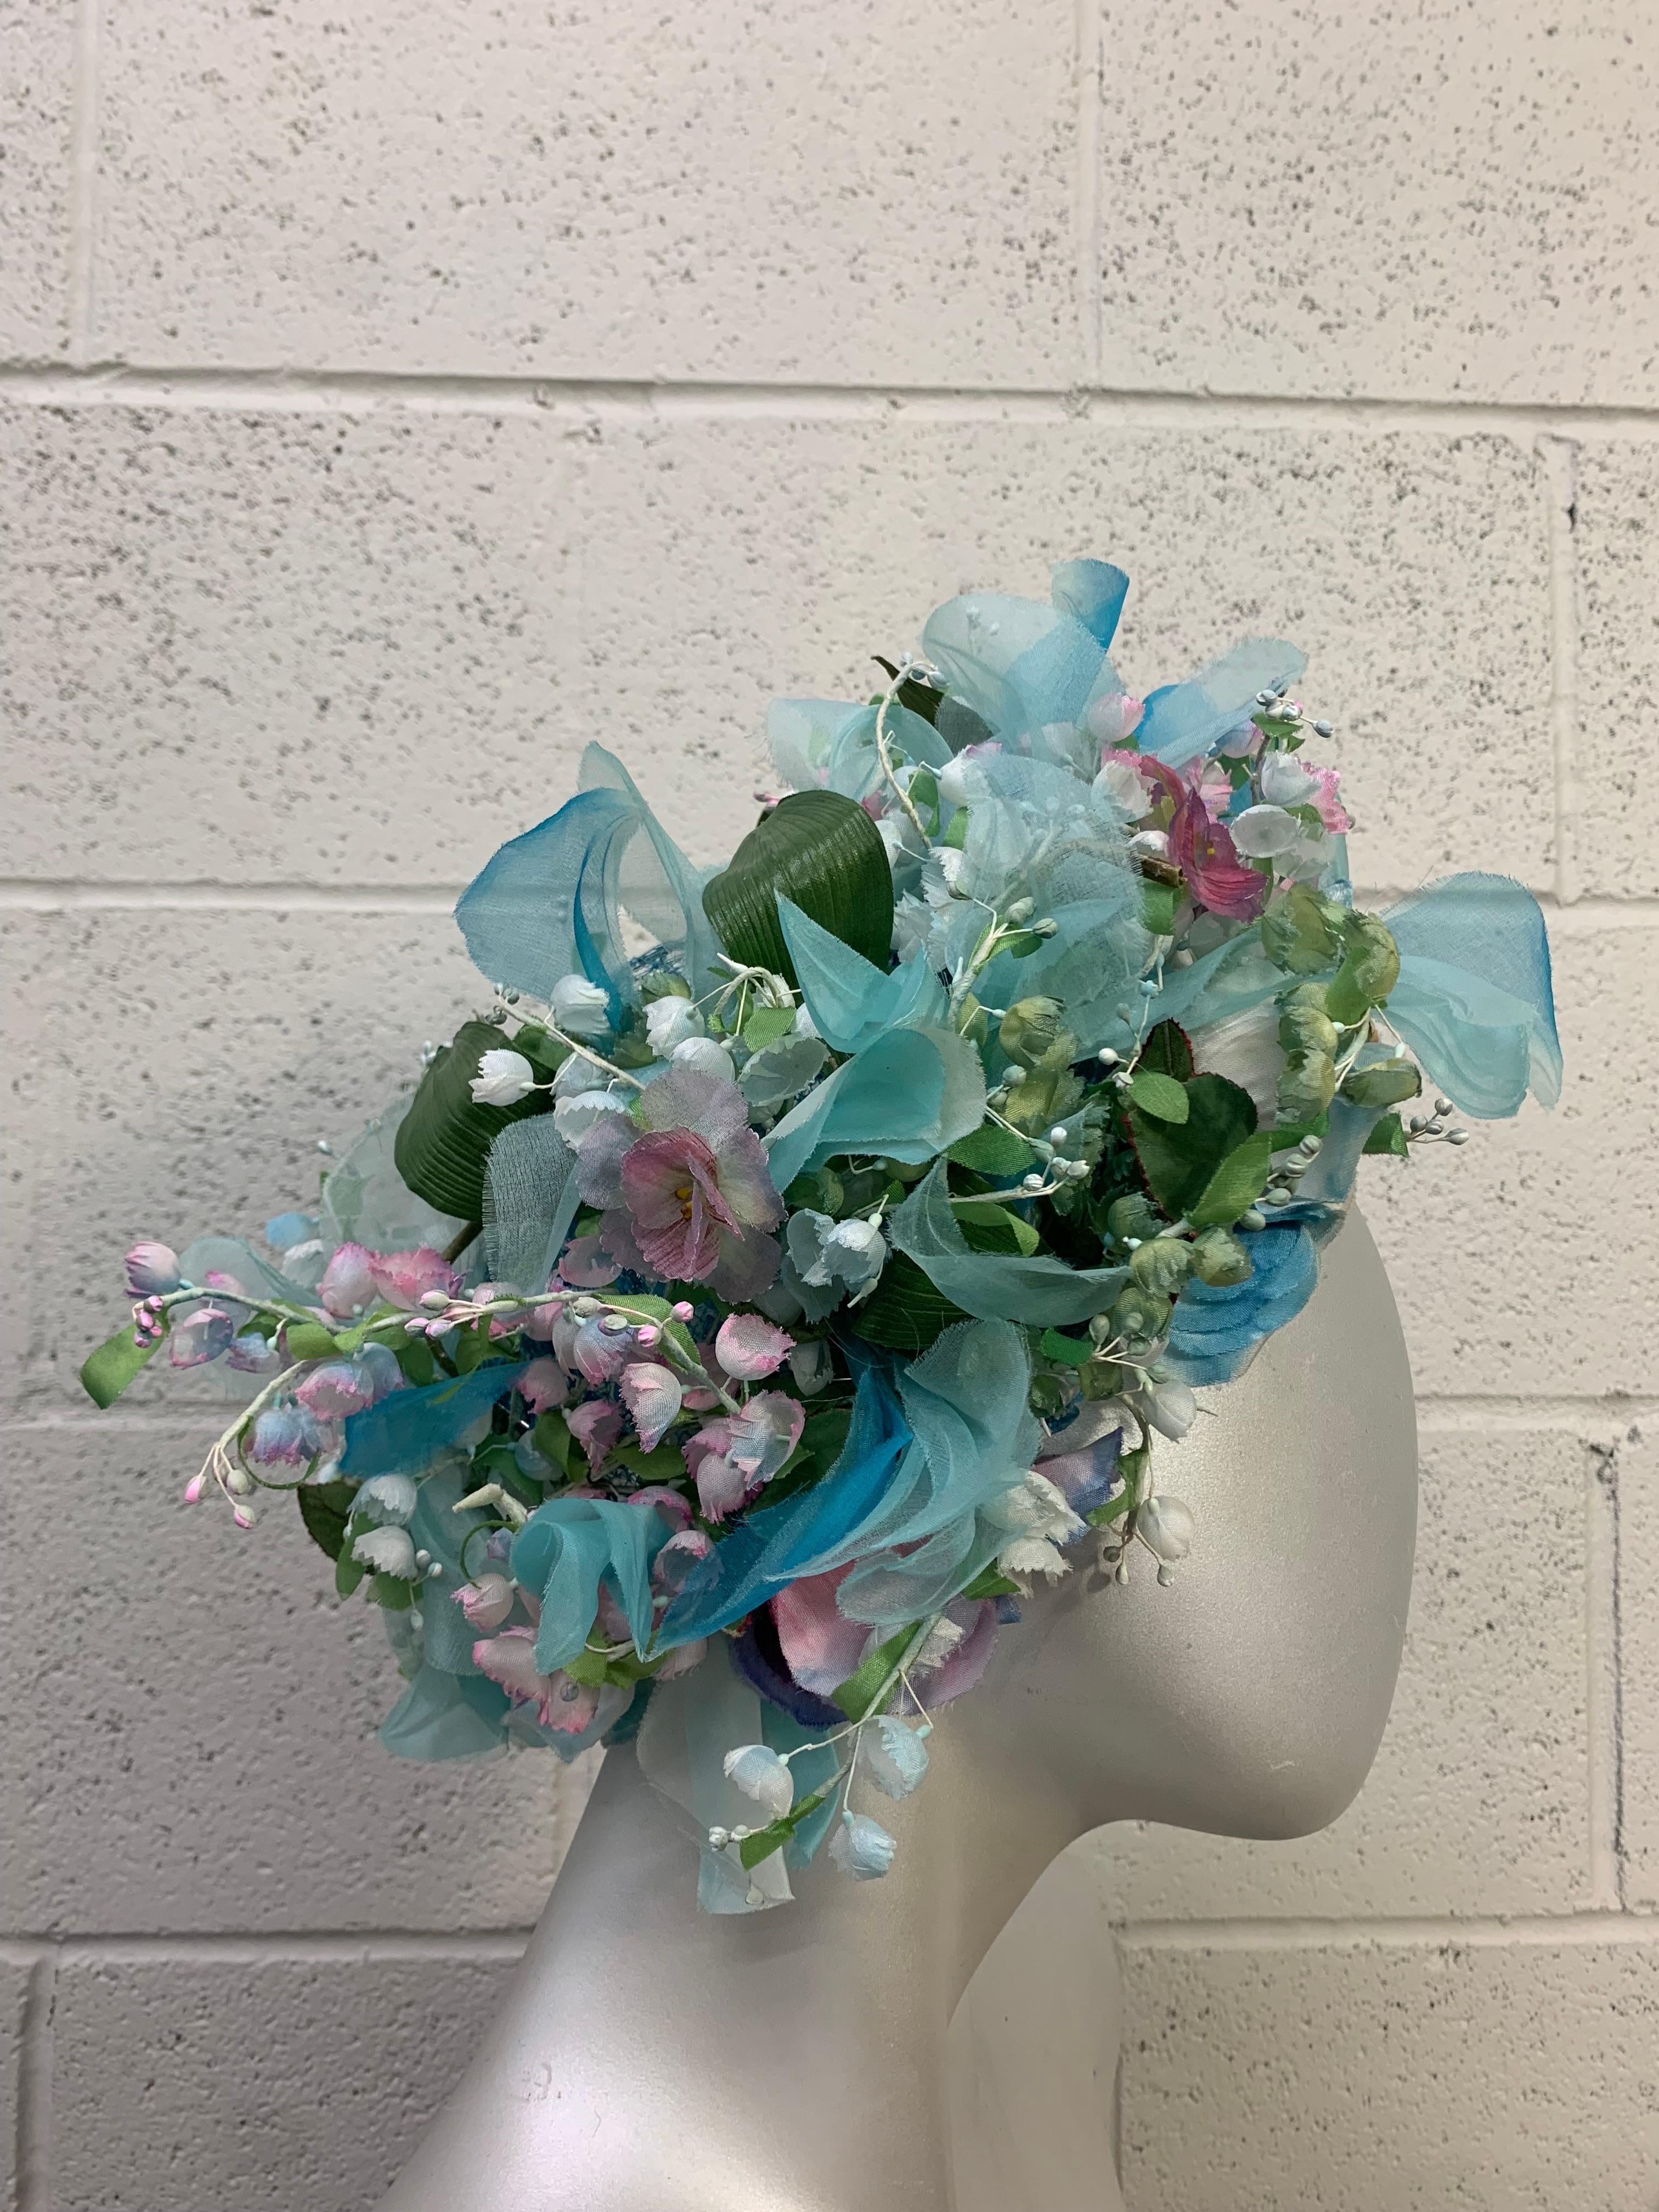 1960s Christian Dior Spectacular Floral Wreath / Turban Hat Turquoise & Purples In Excellent Condition For Sale In Gresham, OR